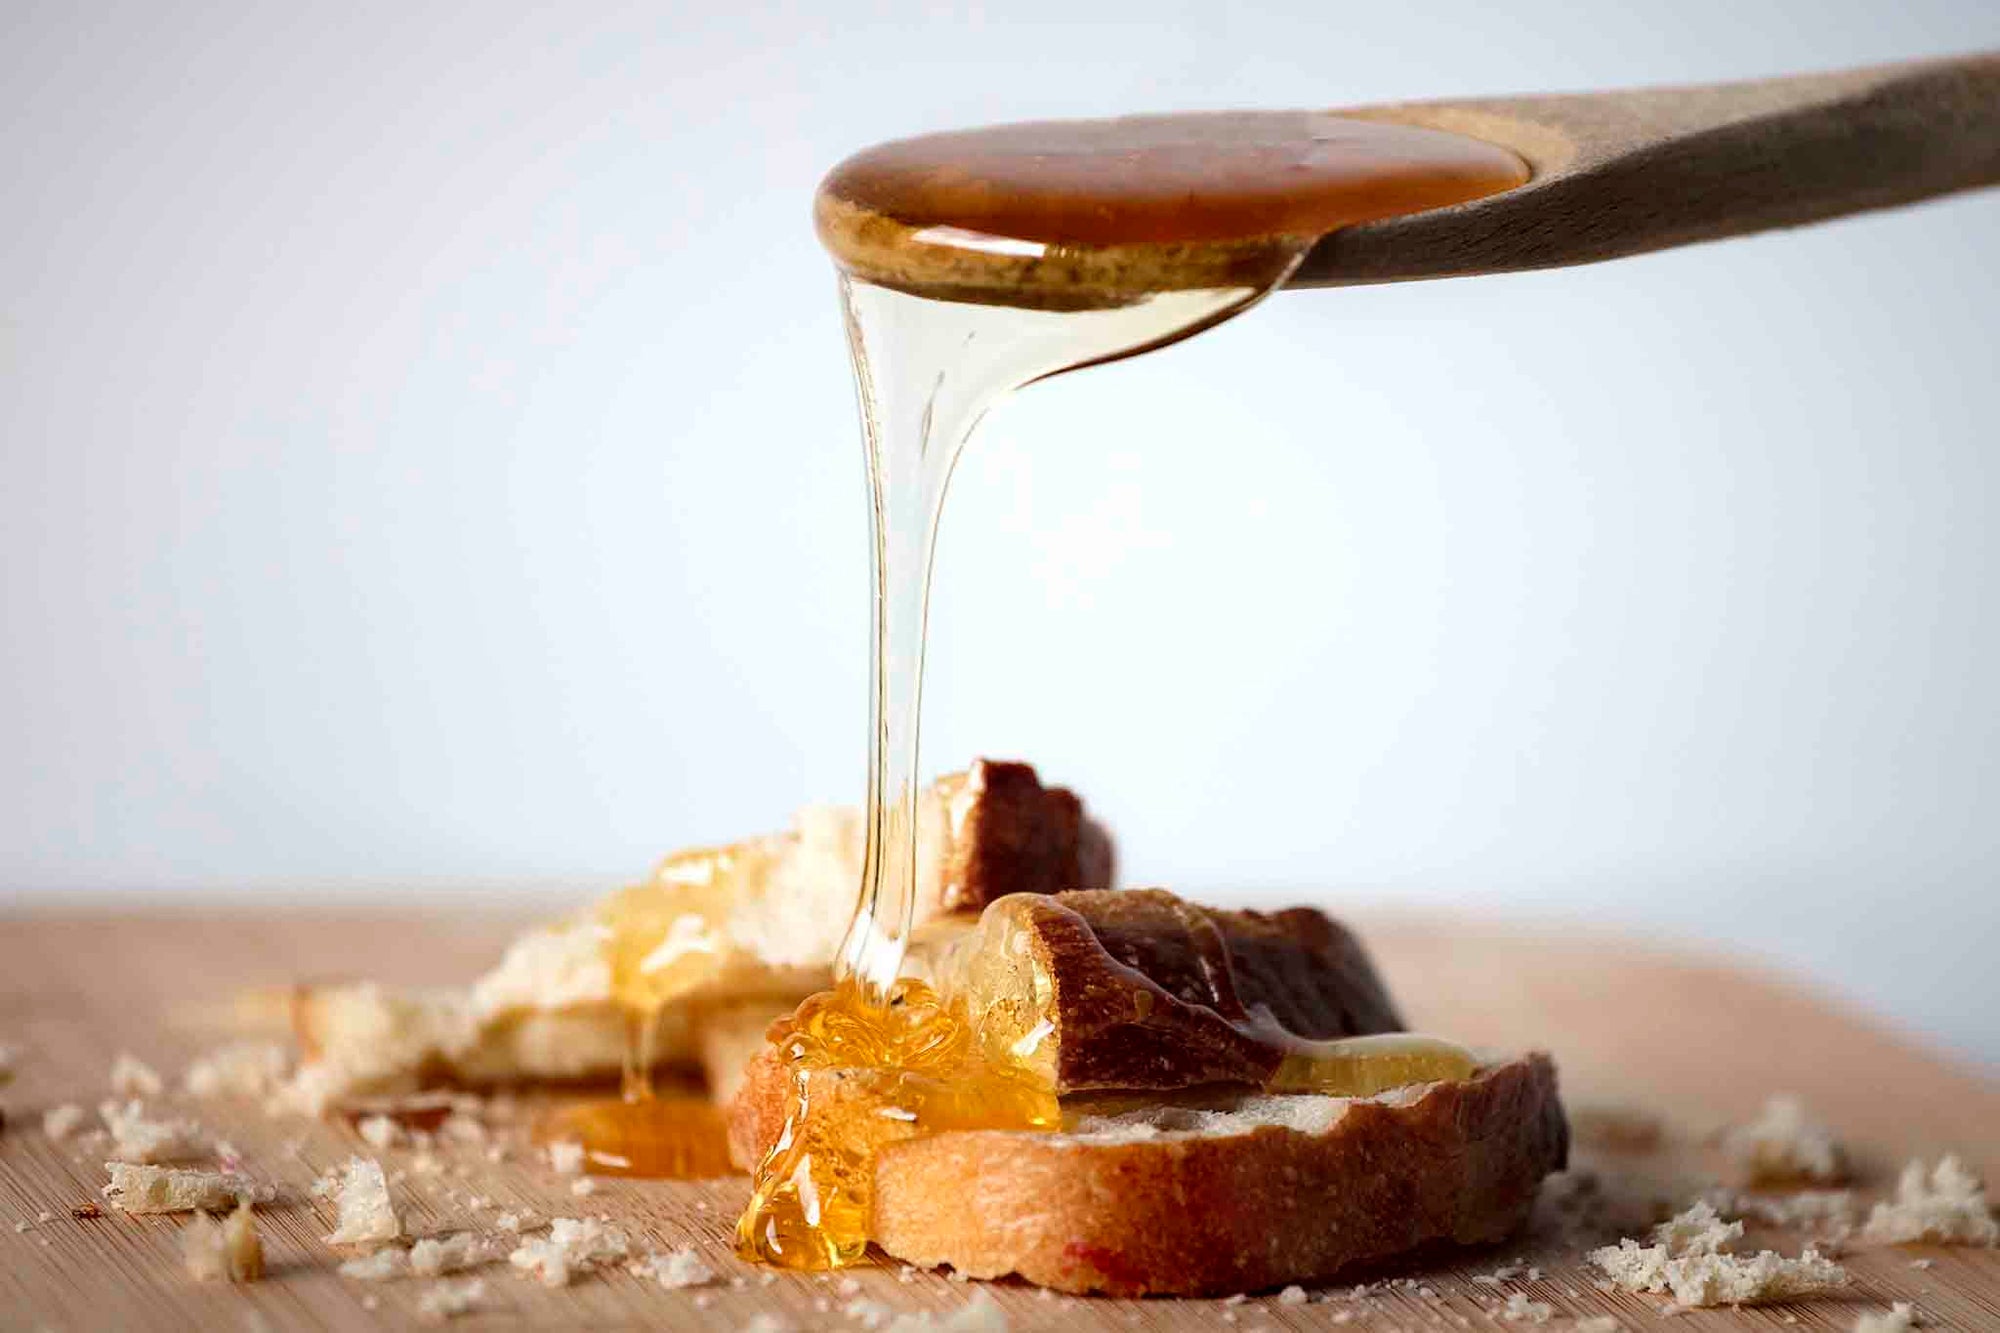 Searching for a Natural Sugar Substitute? Try Honey!